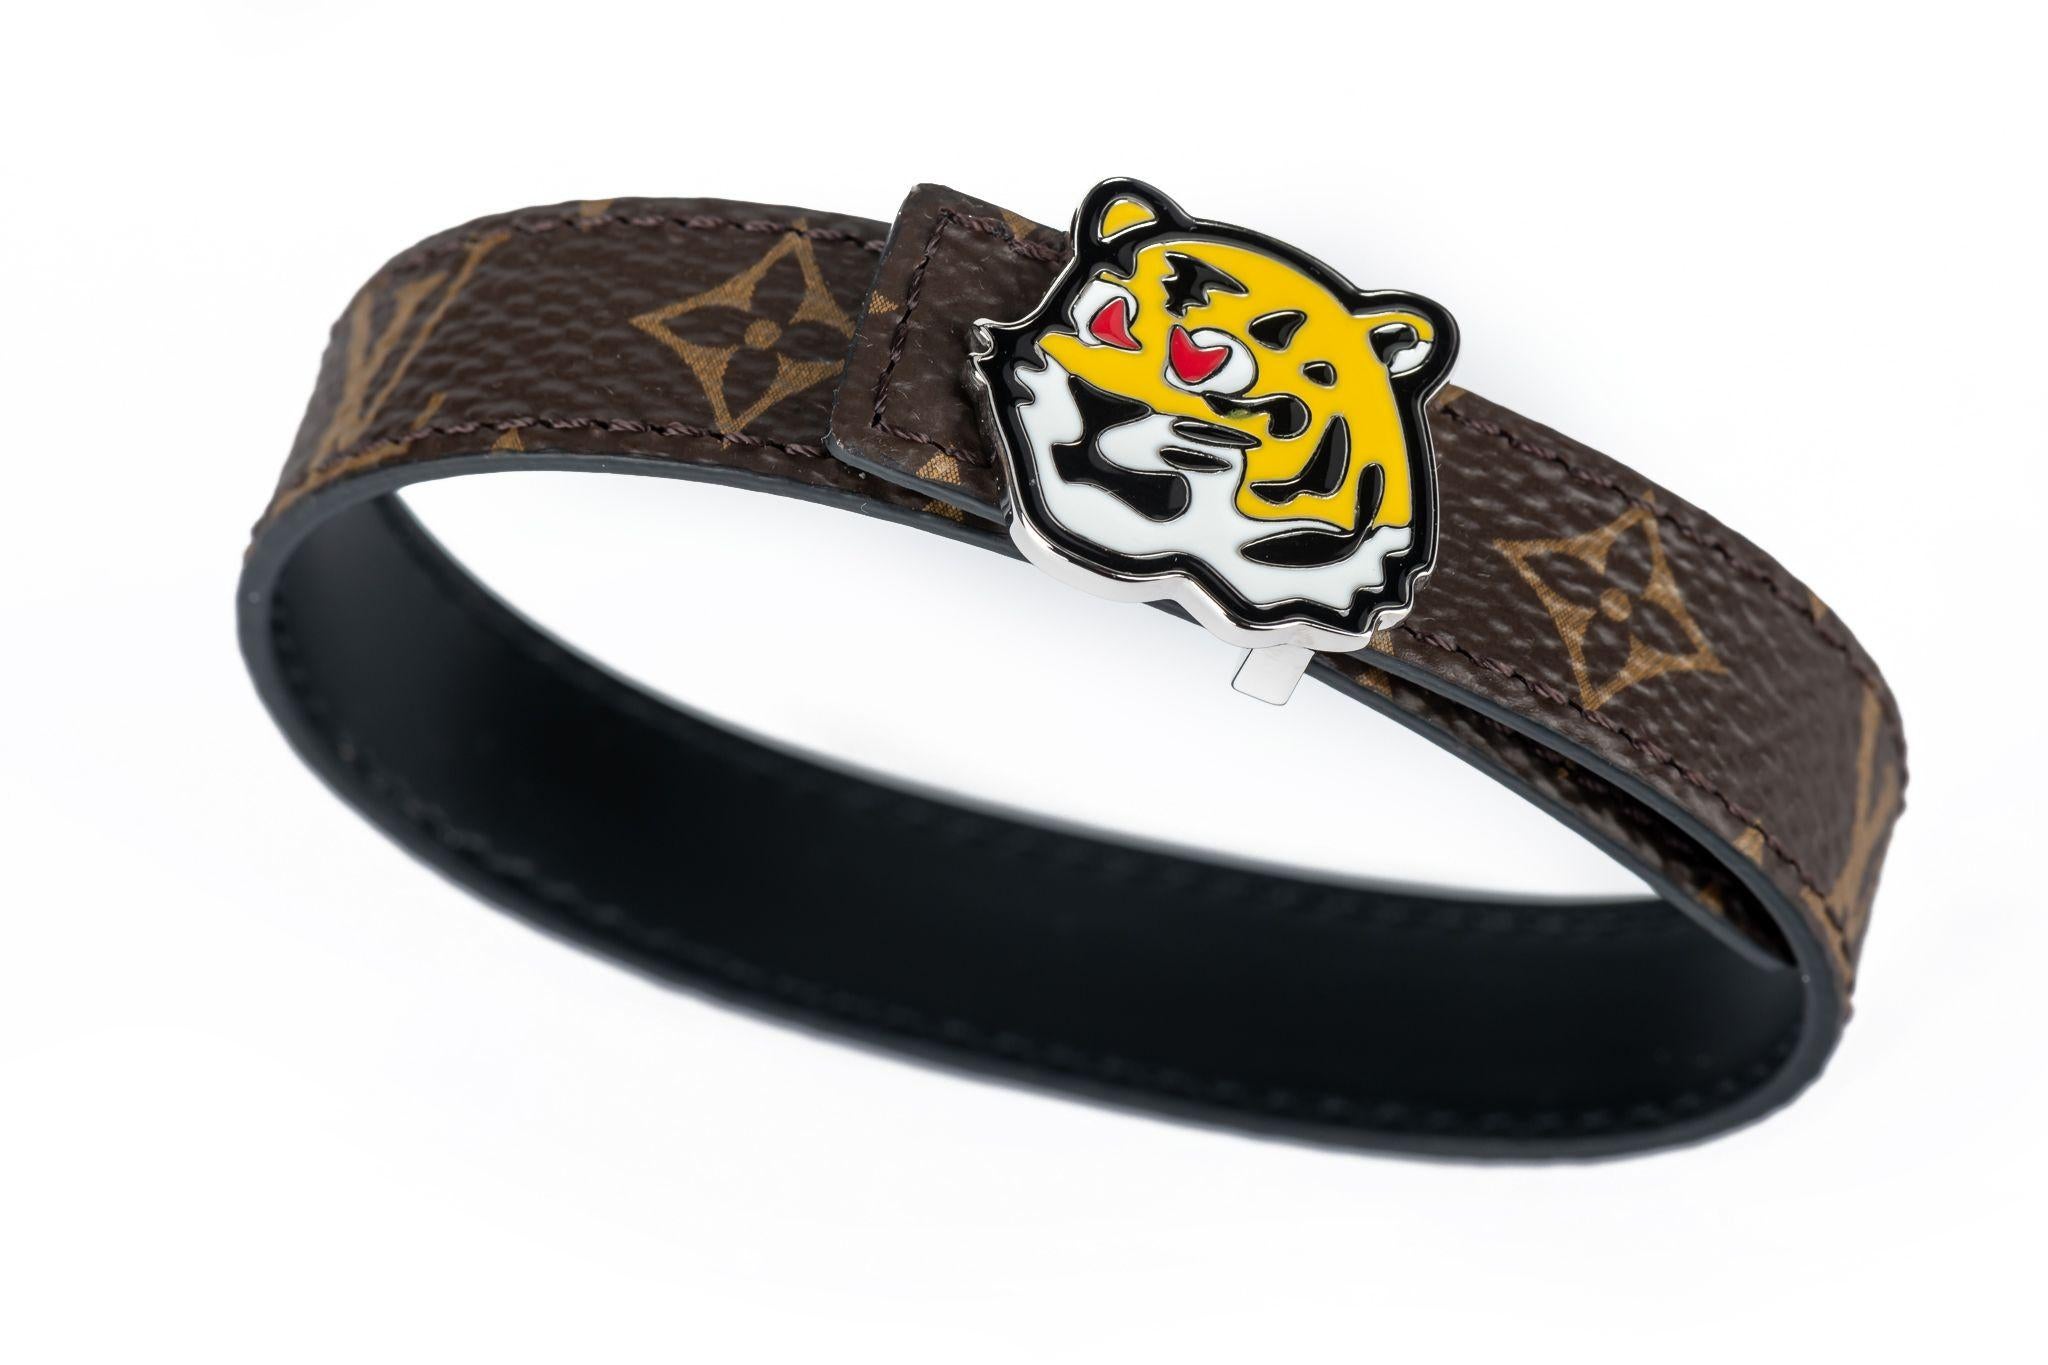 British dandy meets Japanese street culture on this playful LV Tiger 14mm reversible bracelet. This Louis Vuitton X Nigo collaboration presents the designer's signature character with dual styling options thanks to the band, which is made from